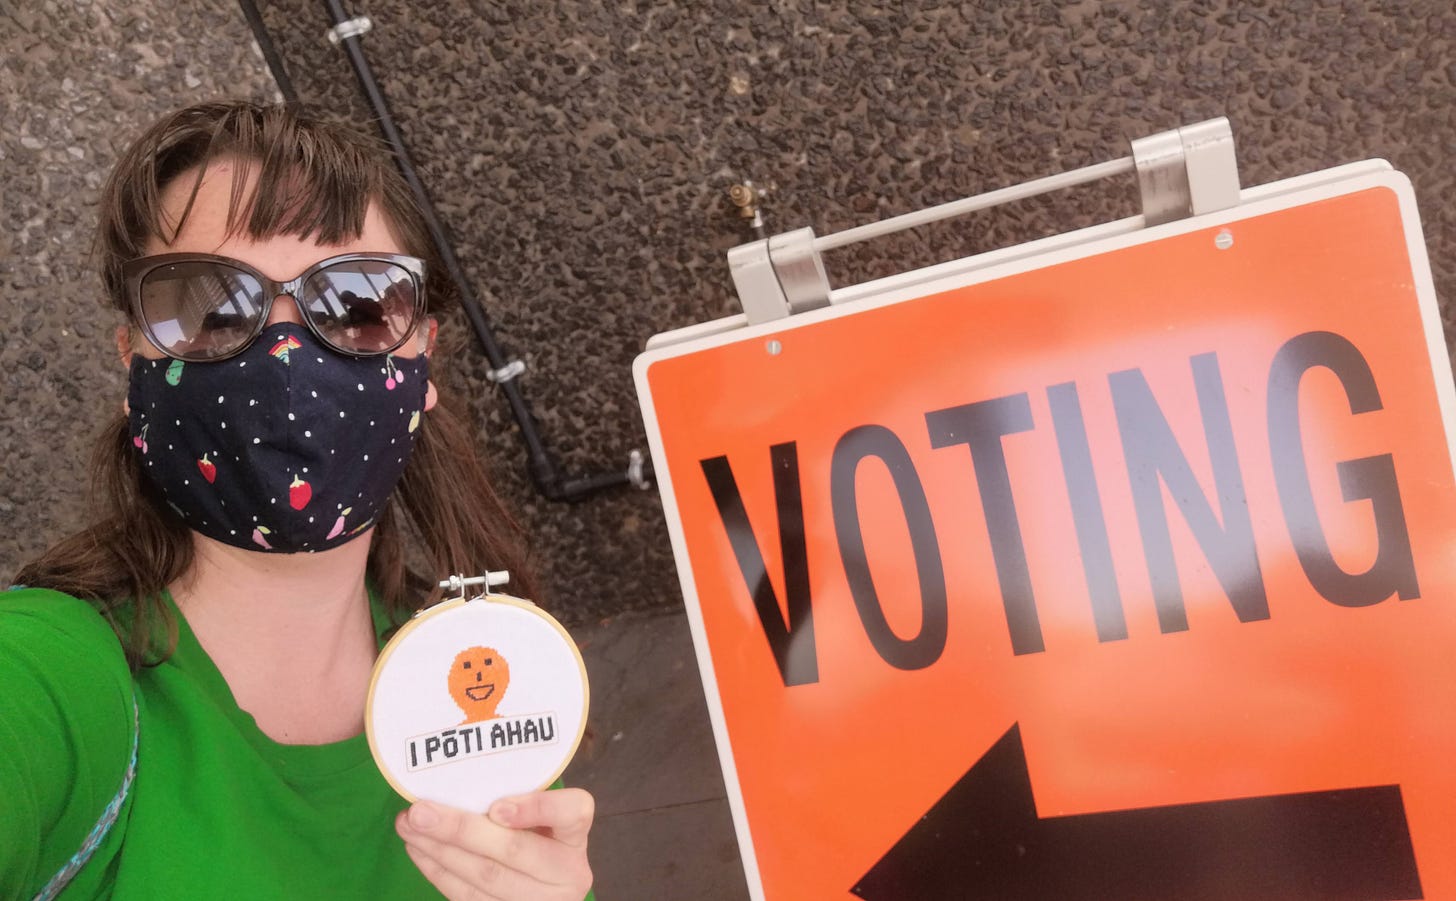 A white woman wearing a fabric face mask and sunglasses beside an orange "VOTING" sign holding a cross stitch in a frame with the orange election guy and the text " I PŌTI AHAU"